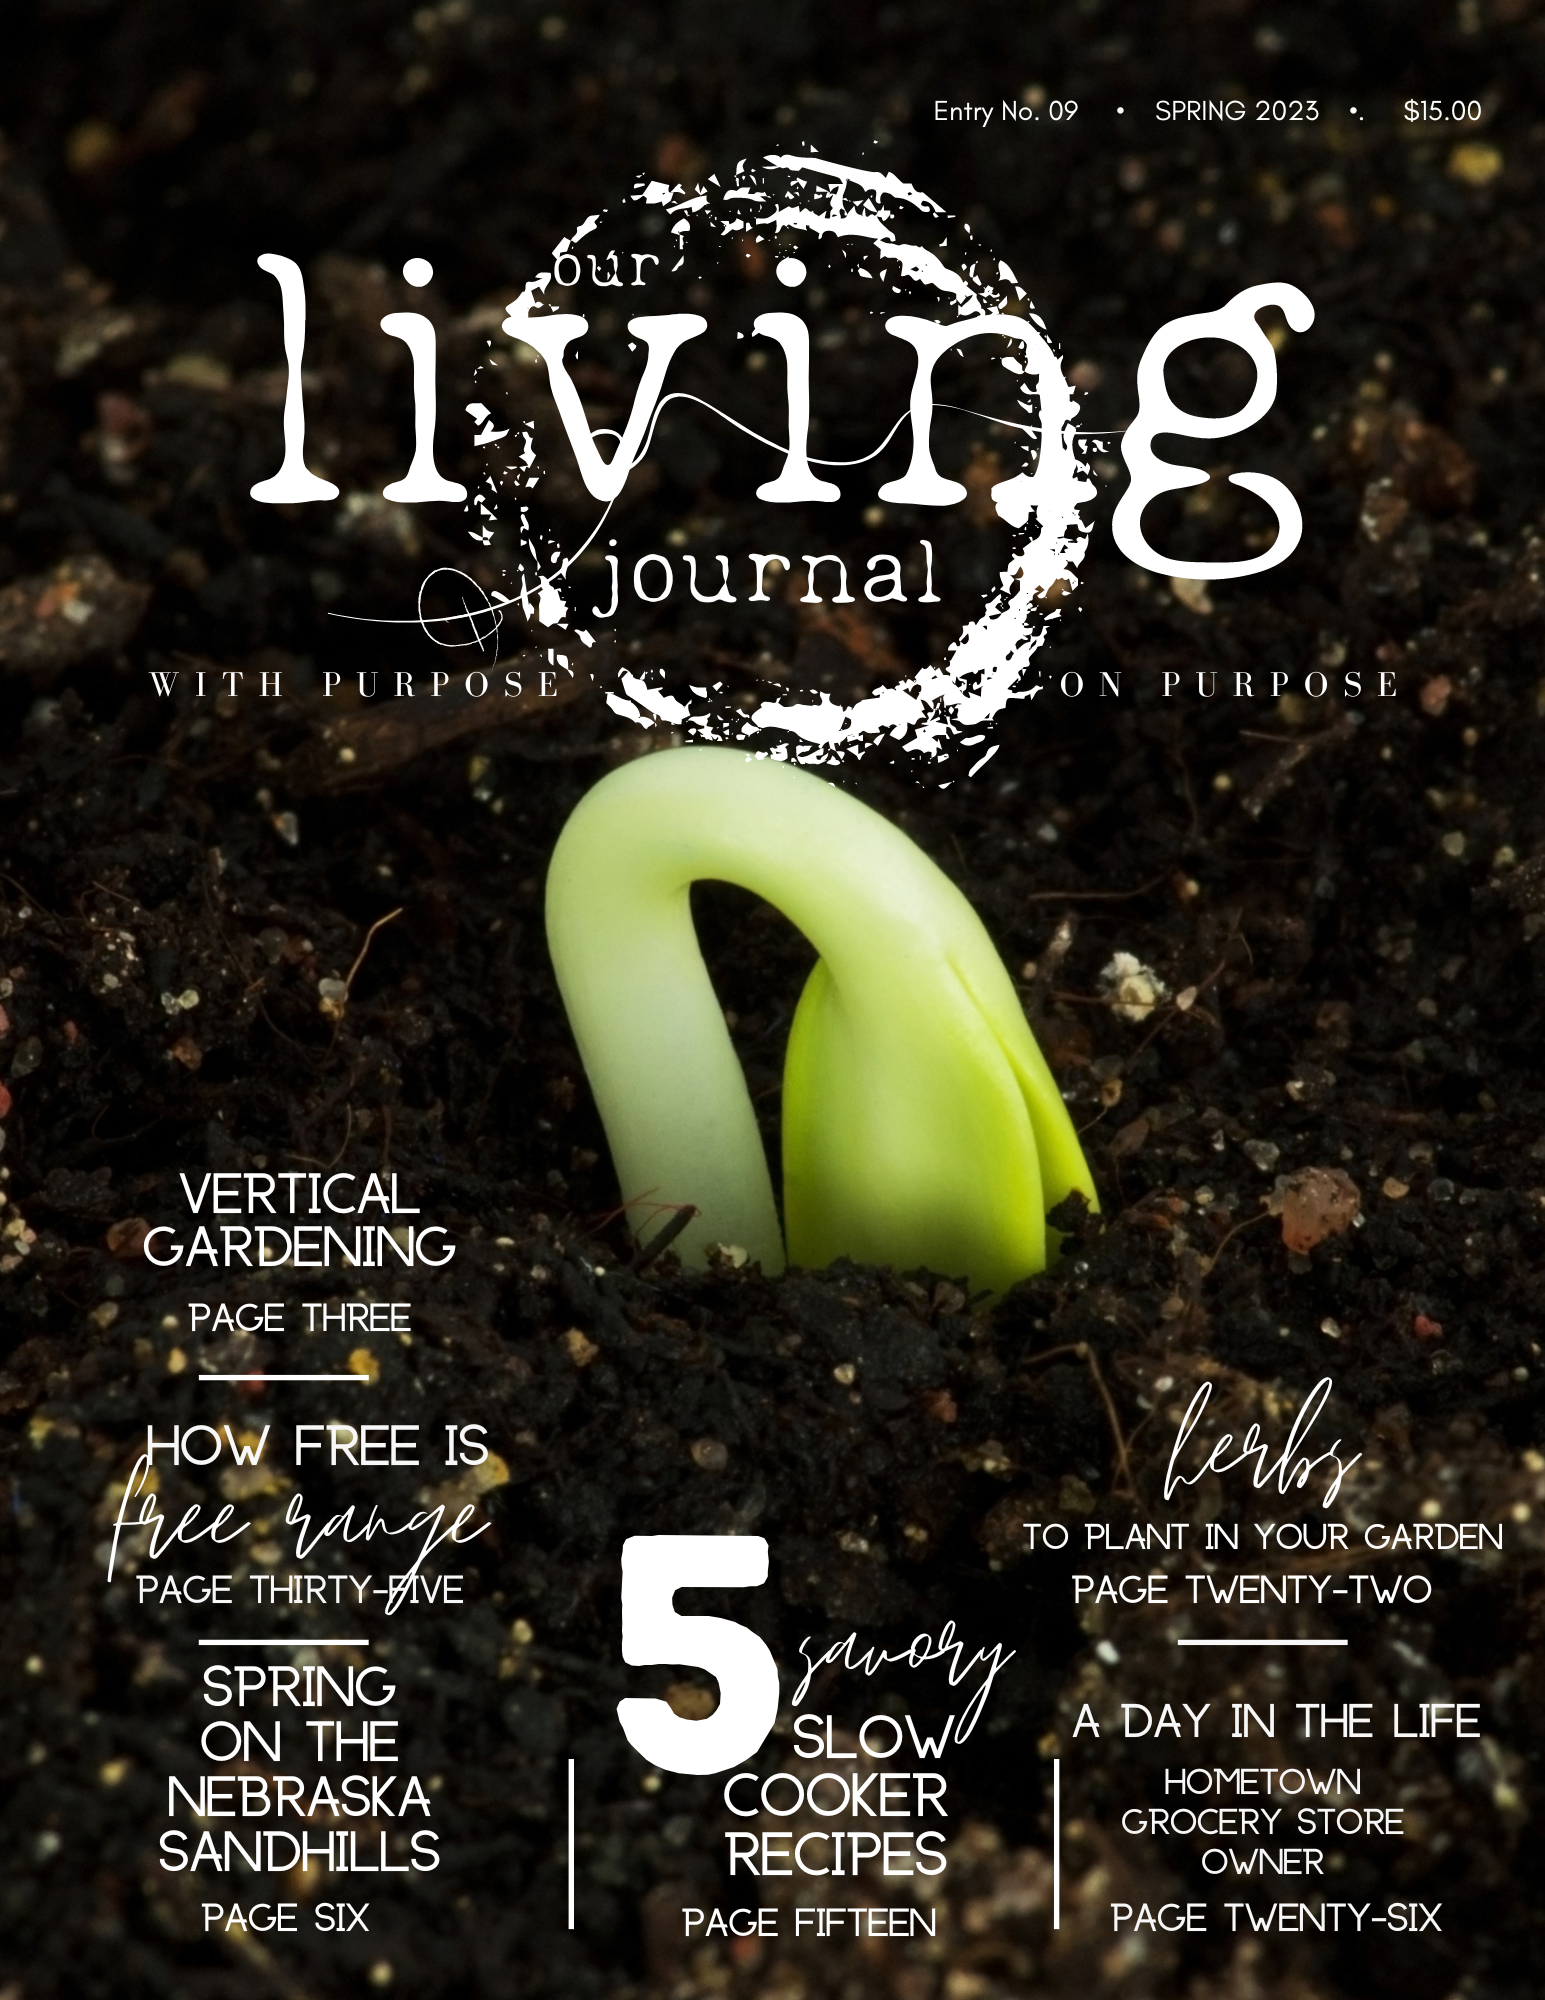 Our Living Journal Entry No. 09 Spring